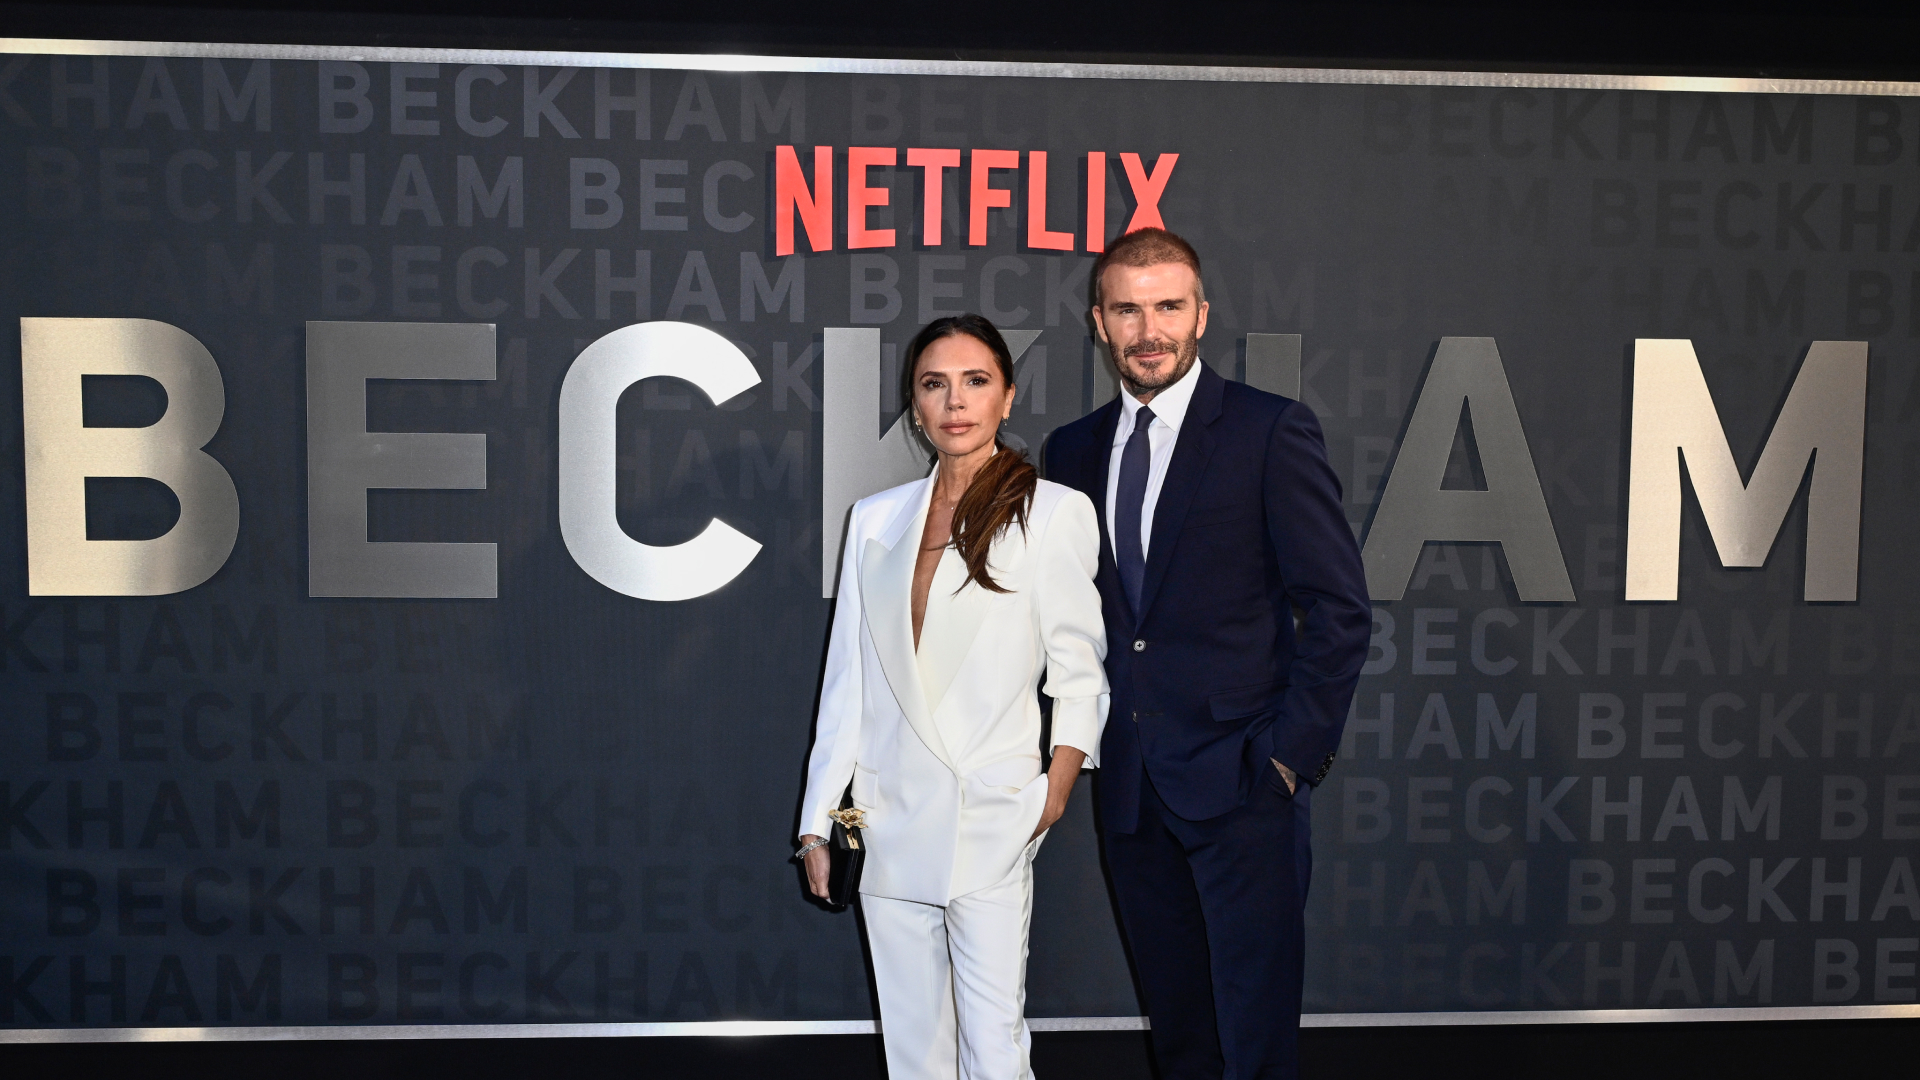 Victoria Beckham Speaks Out on Those Divorce Rumors, & Discusses